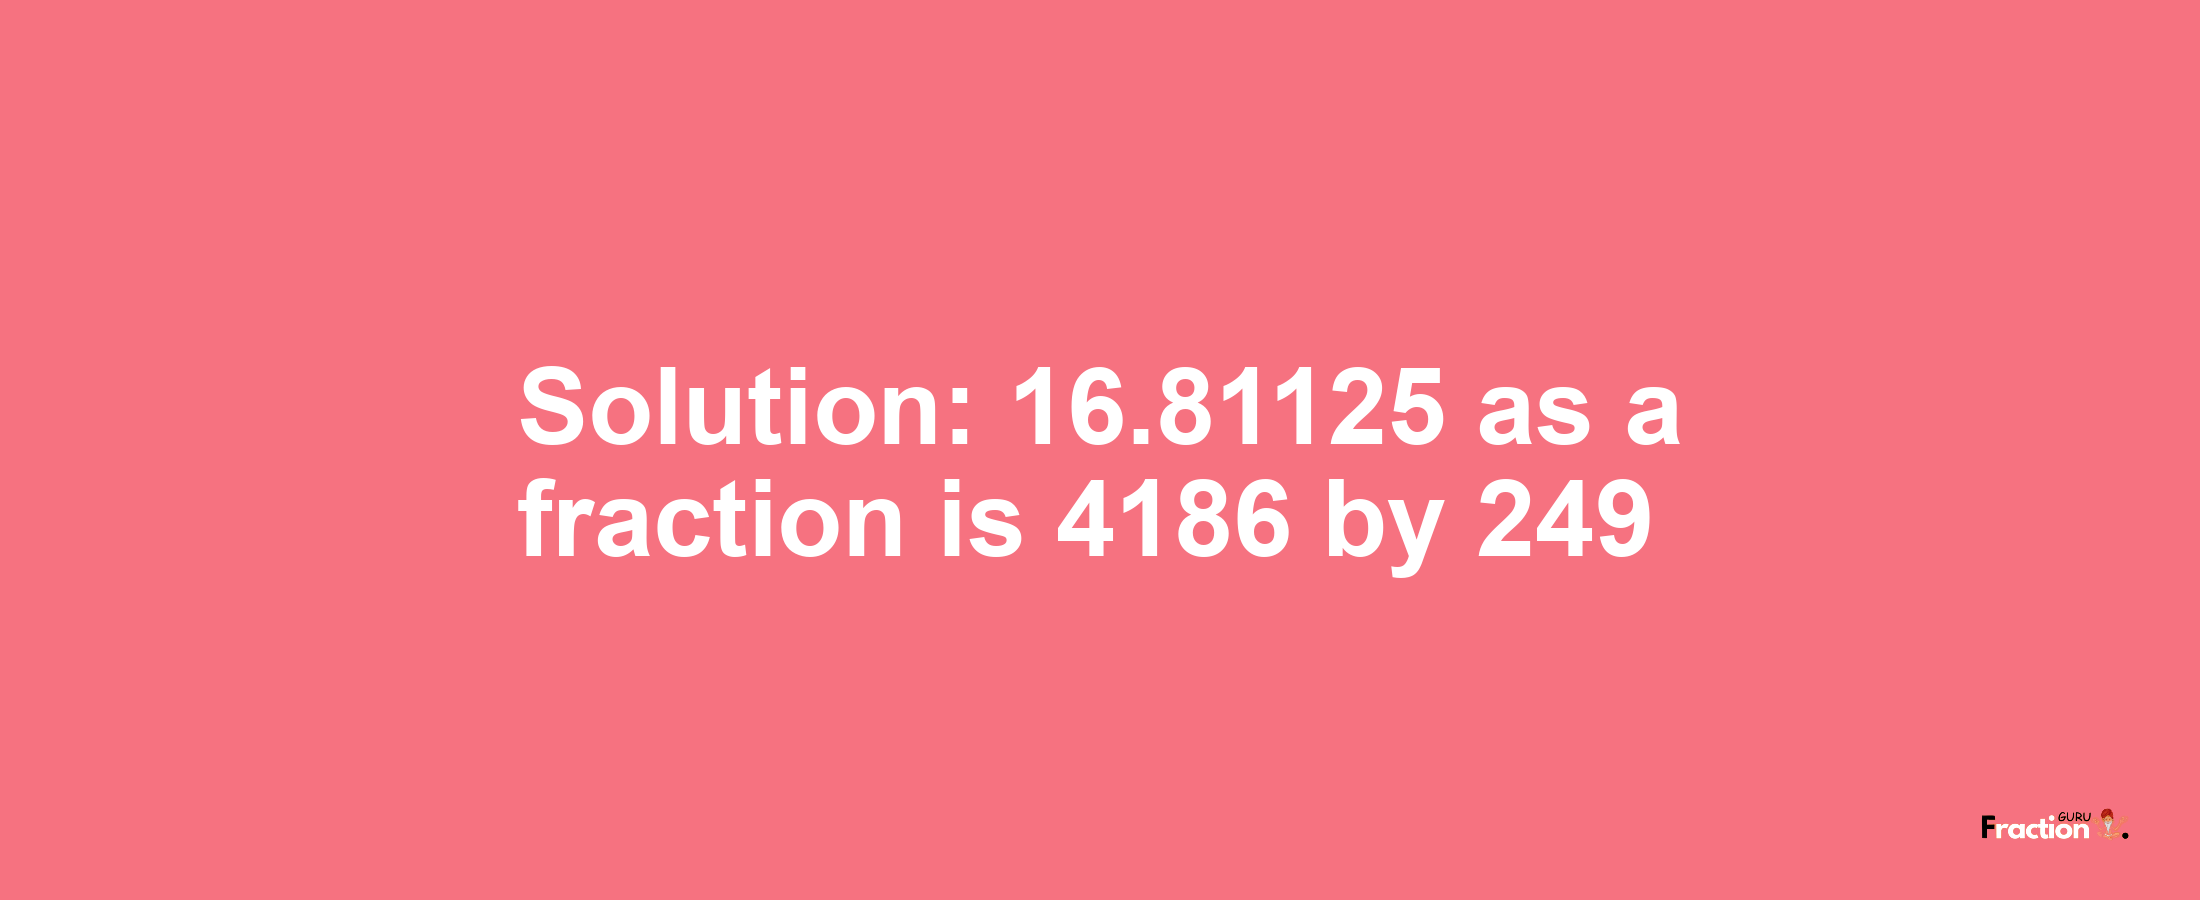 Solution:16.81125 as a fraction is 4186/249